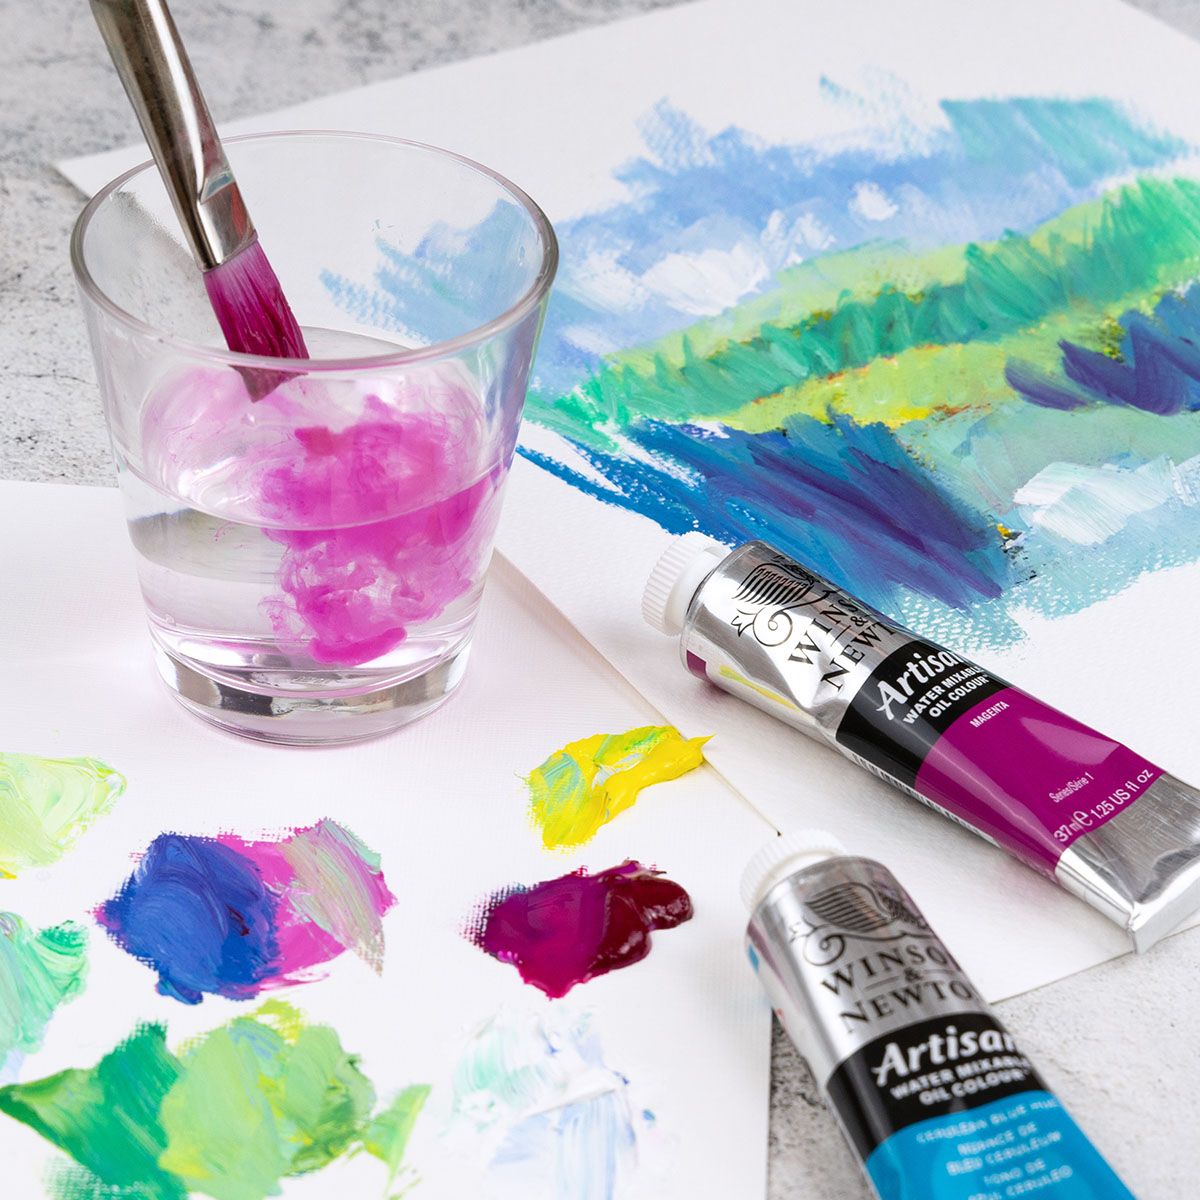 Artisan Water Mixable Oil Colour Starter Set by Winsor & Newton -  094376908275